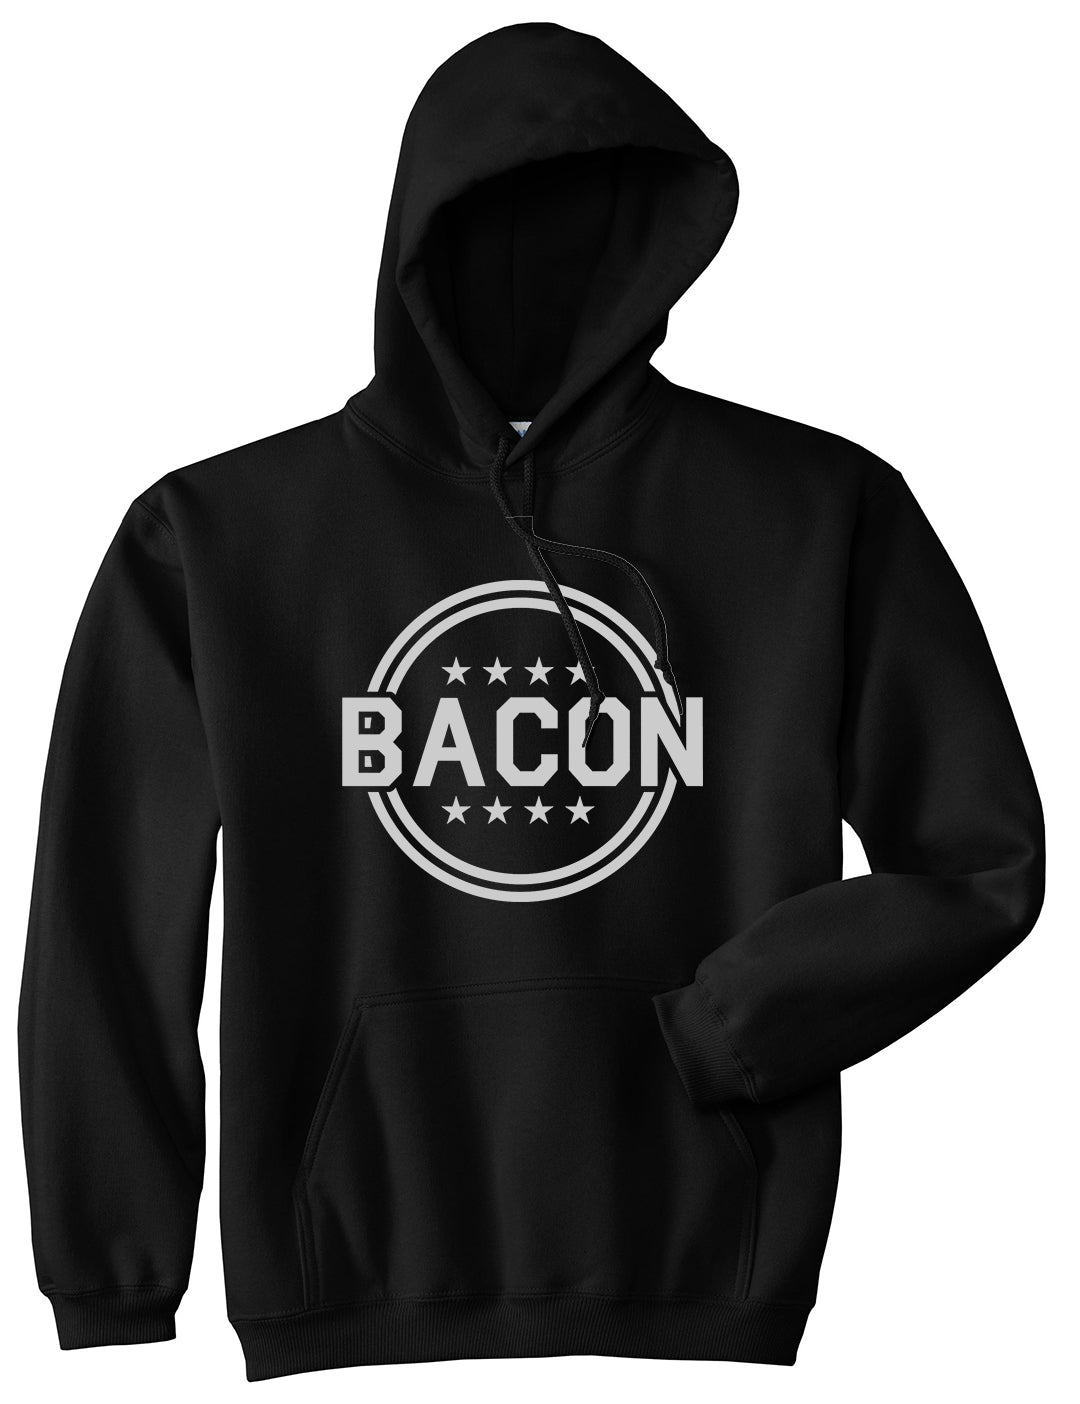 Bacon Stars Black Pullover Hoodie by Kings Of NY